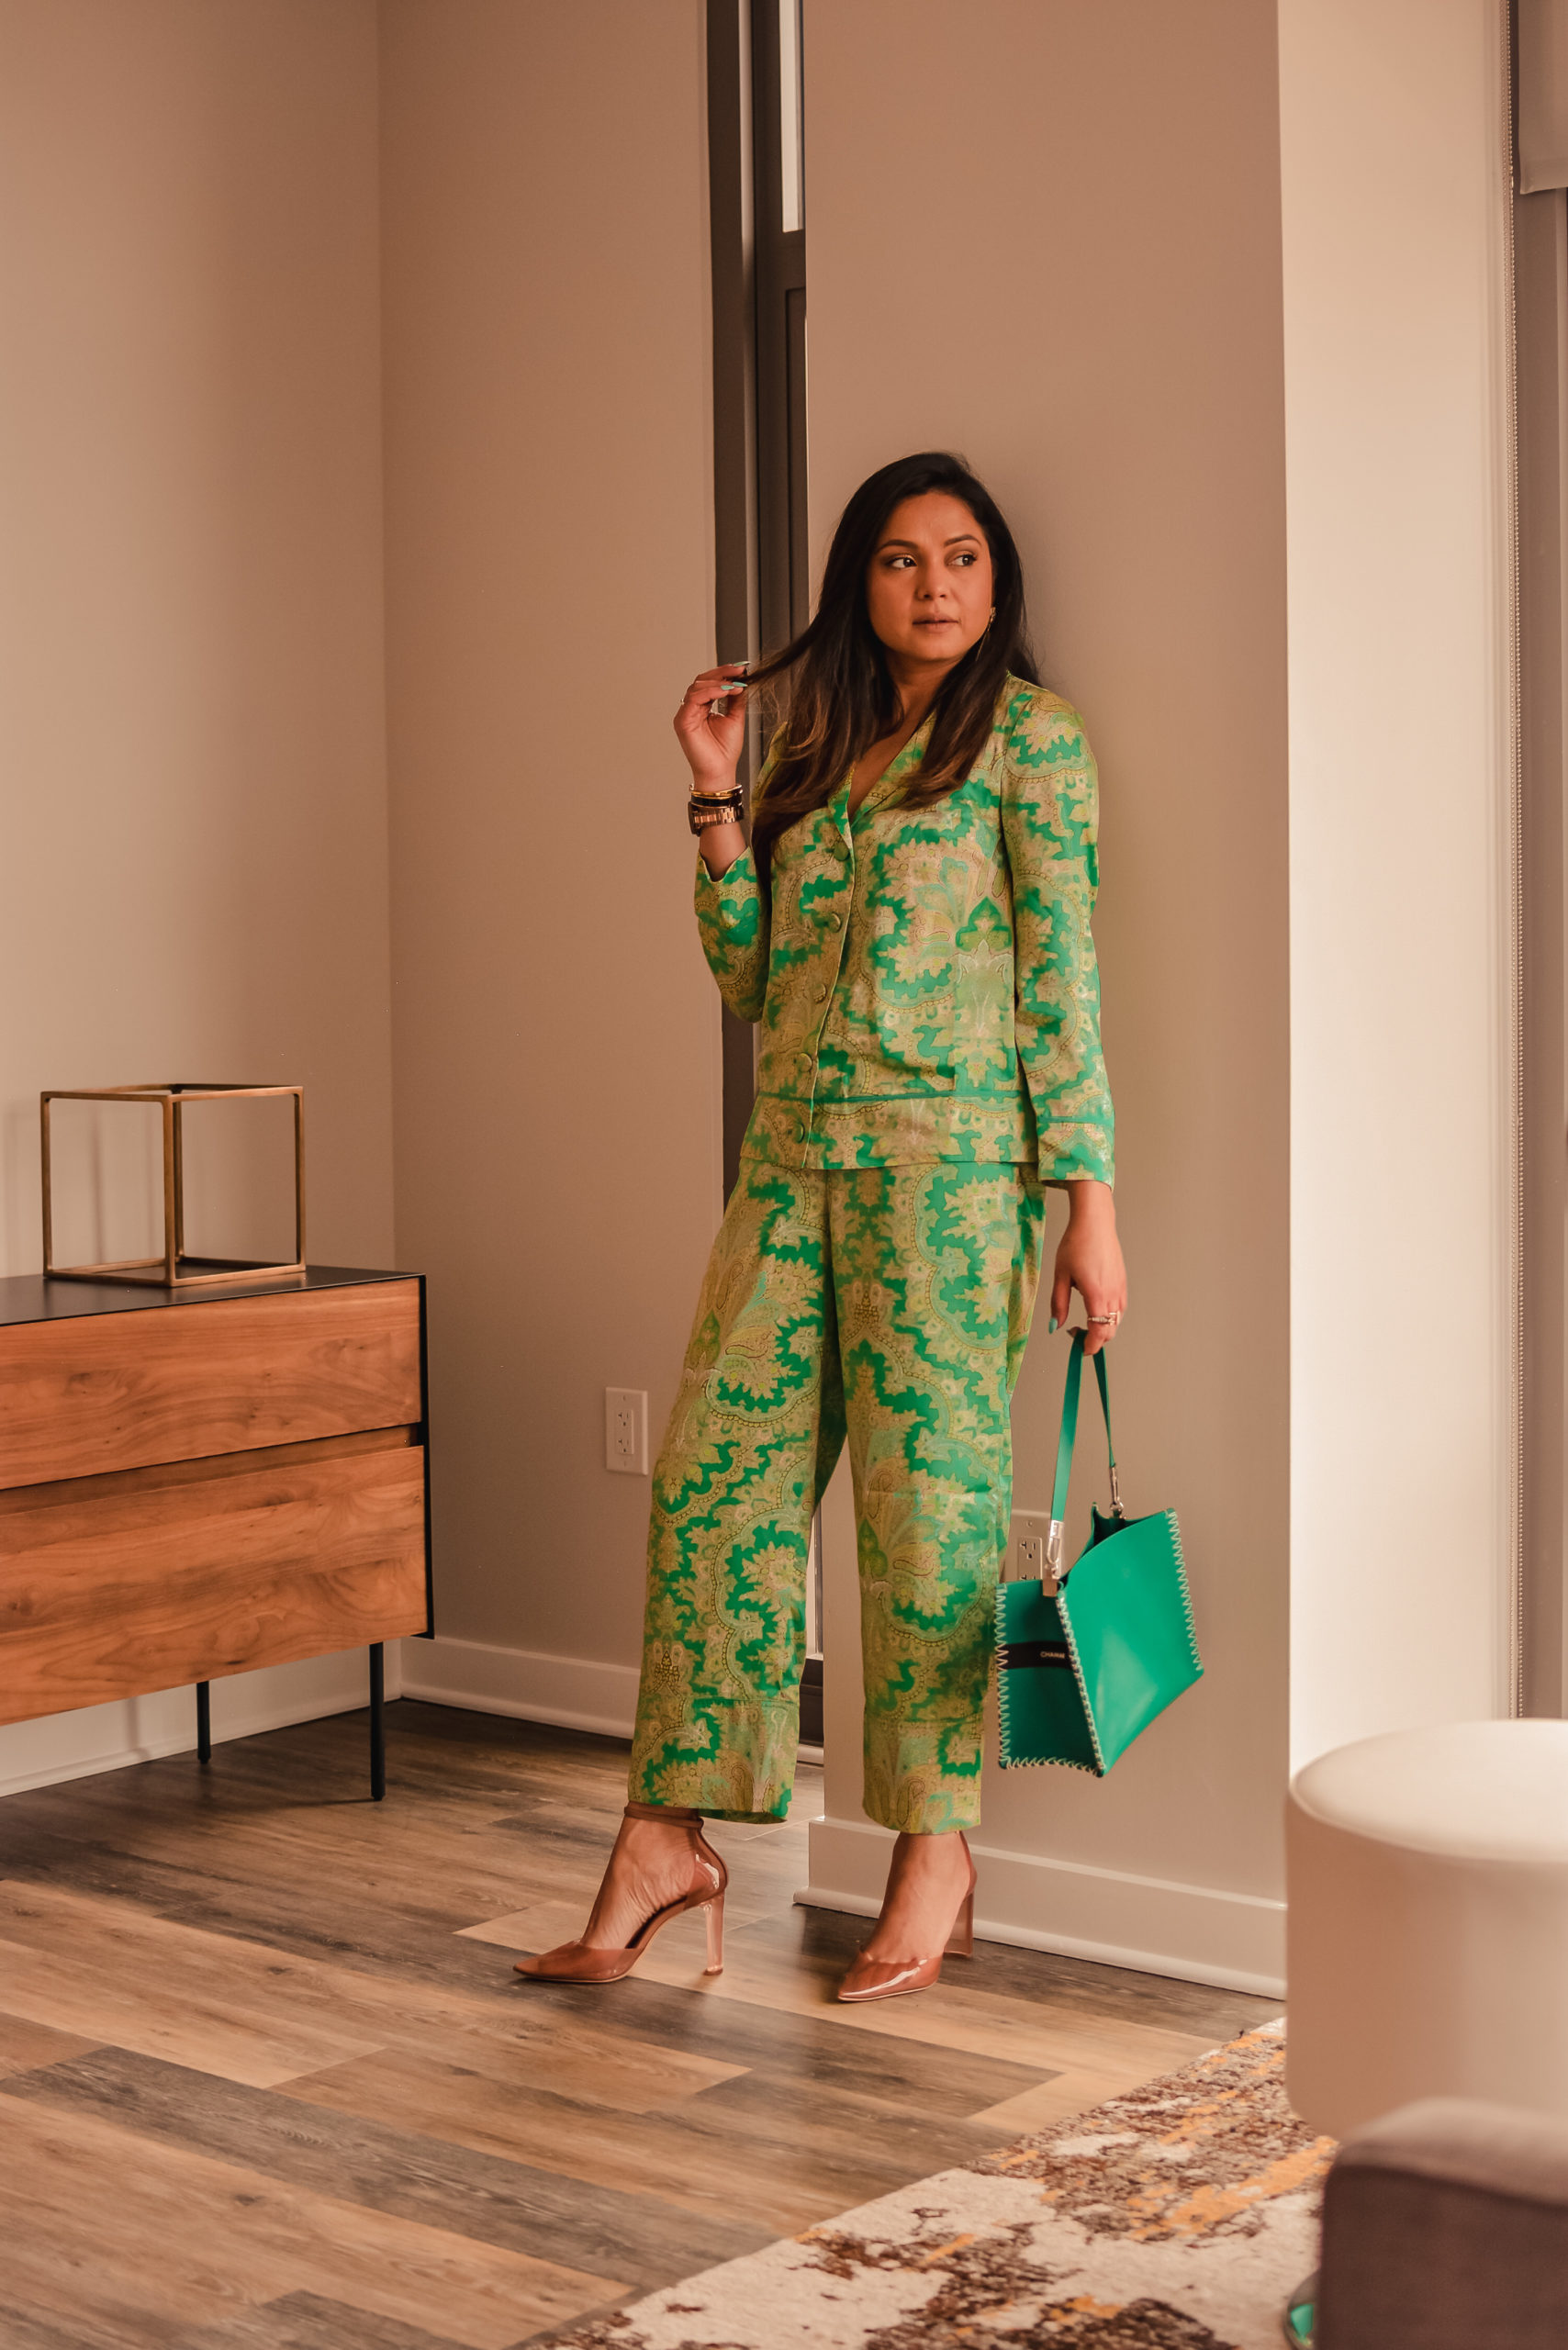 I am wearing a matching set which has pants and blouse. It is a paisley print set from J crew and is called the rattti collection. I teamed it up with a heels and a bag for day look and a sequin kimono for a night look. Saumya Shiohare, Myriad Musings 